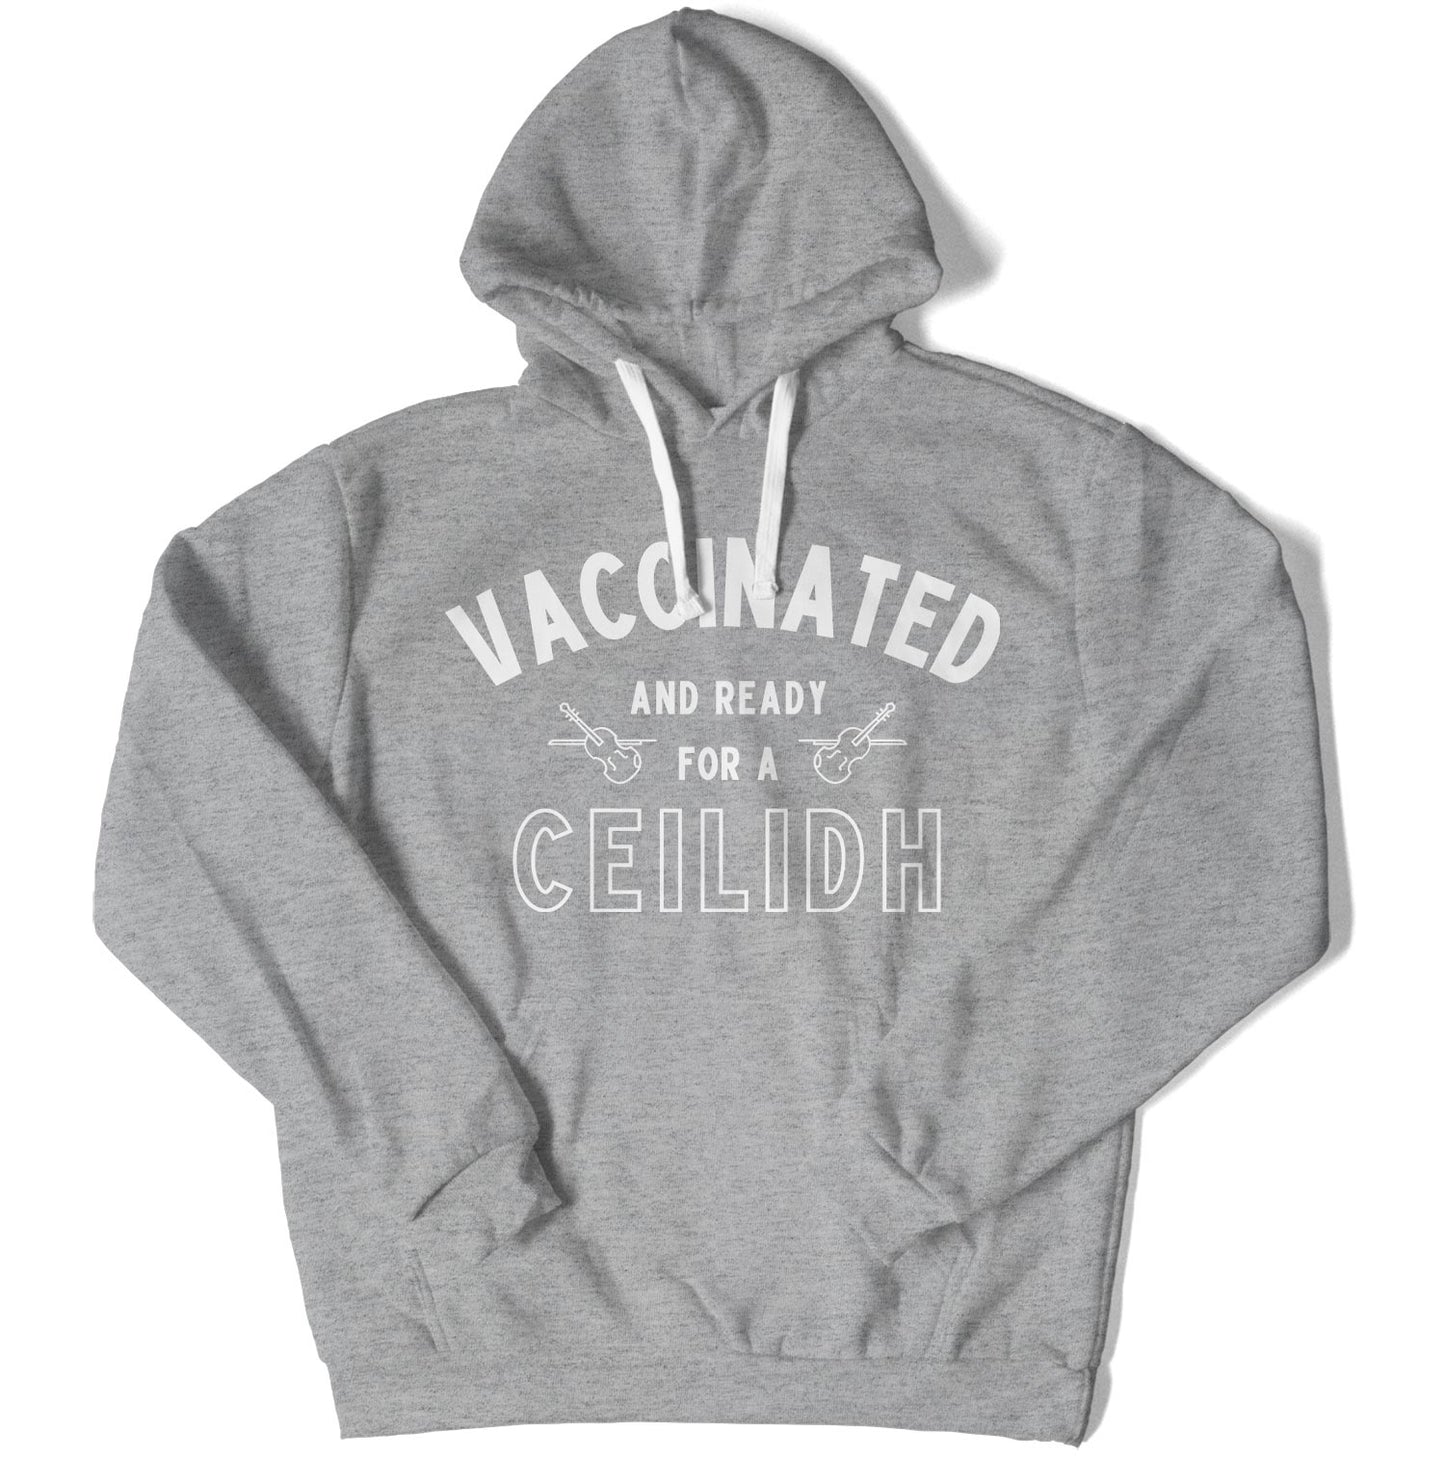 Vaccinated and Ready for a Ceilidh Unisex Hoodie-East Coast AF Apparel